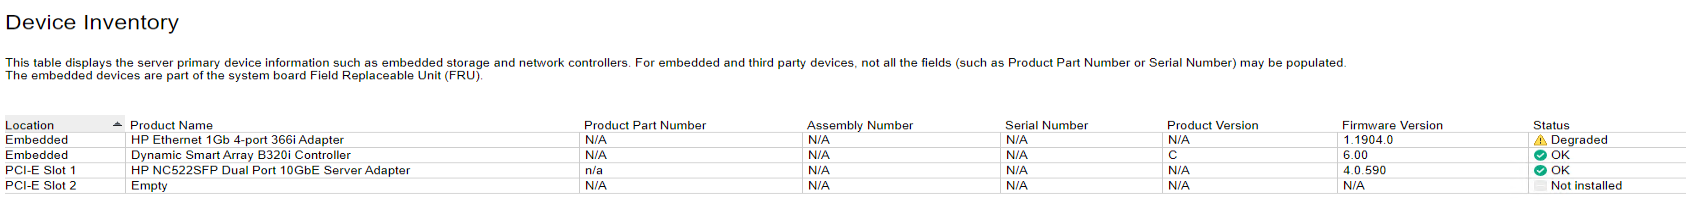 Device Inventory.png